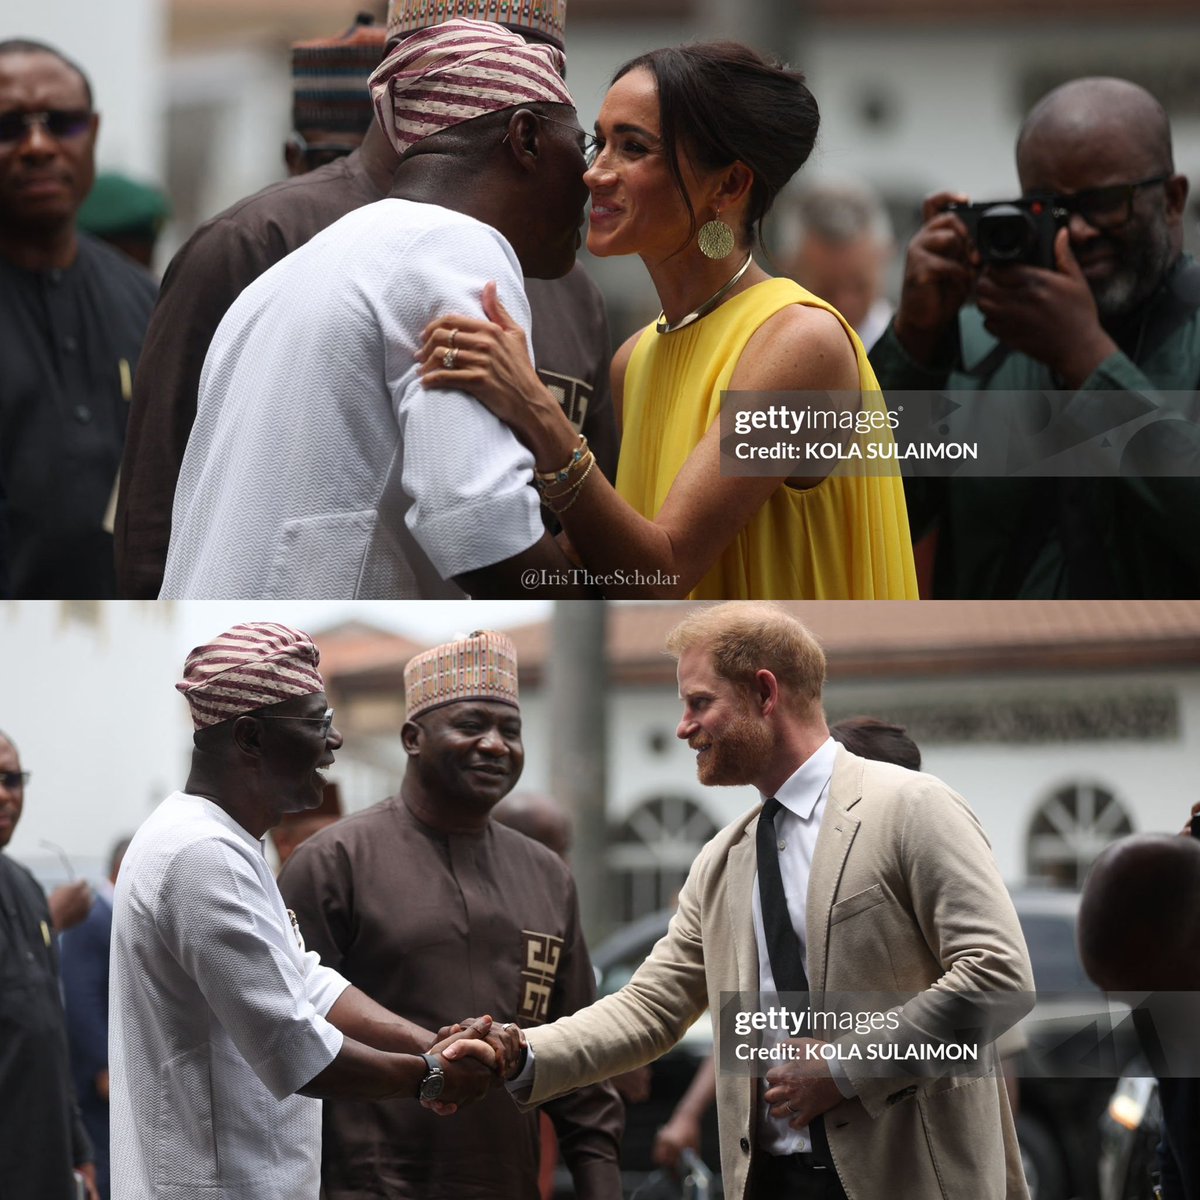 Can we take a moment to commend all #Nigerian photojournalists like @kolasulaimonafp and reporters like @simijourno for their focus on the truth and essence of this trip, for #PrinceHarry and #PrincessMeghan for @WeAreInvictus 💛🖤🇳🇬. #HarryAndMeghanNigeria #HarryandMeghanNaija